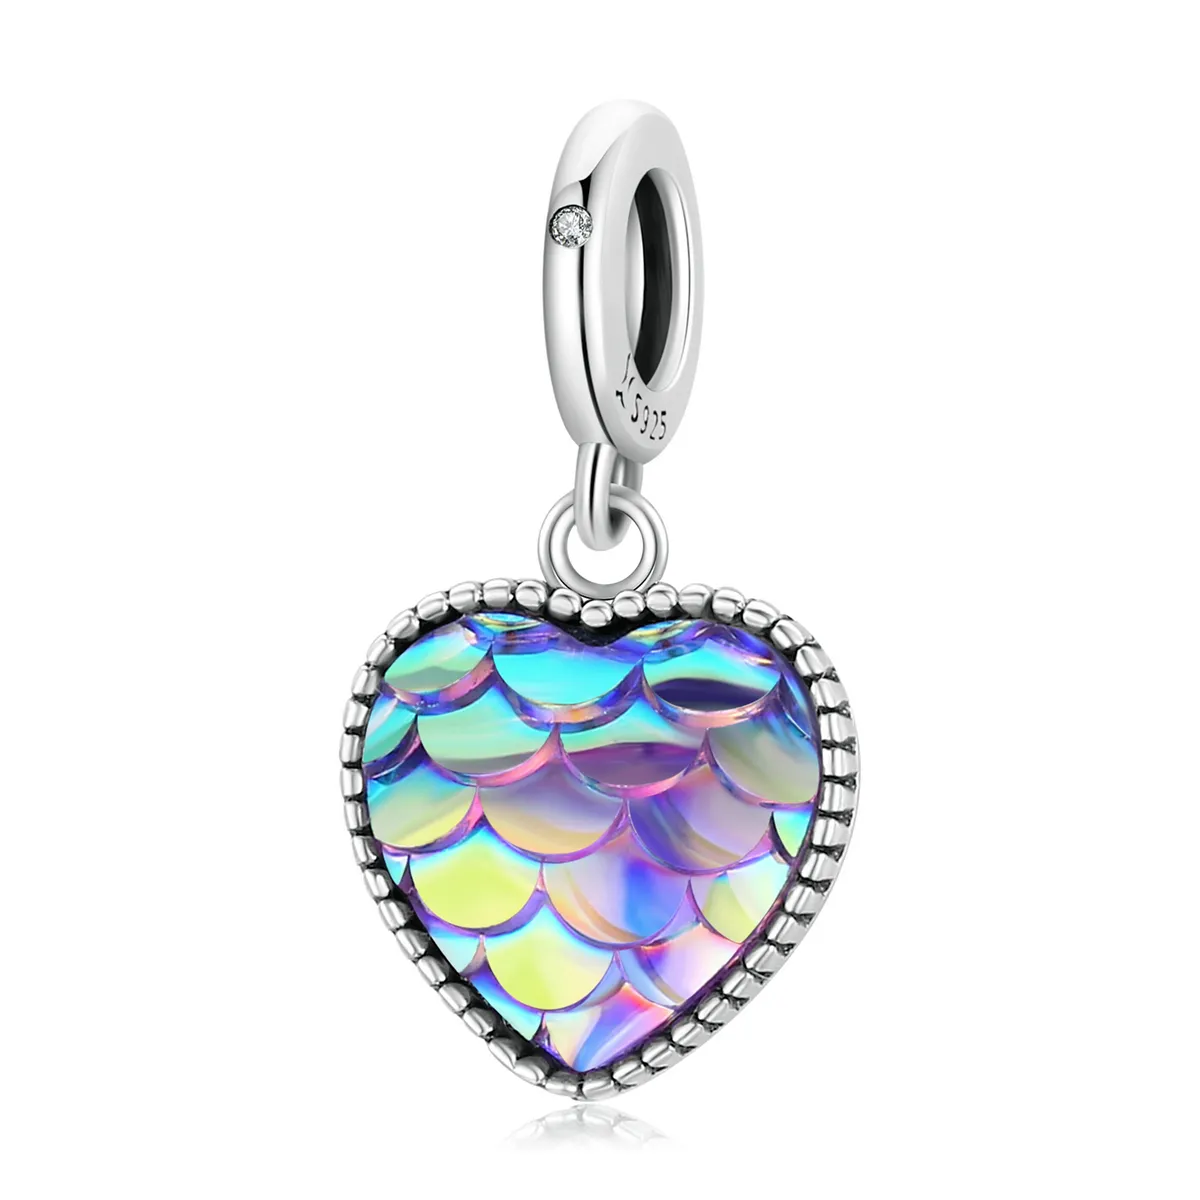 Sterling silver S925 Fish Scale Heart Pendant Bracelet Charms